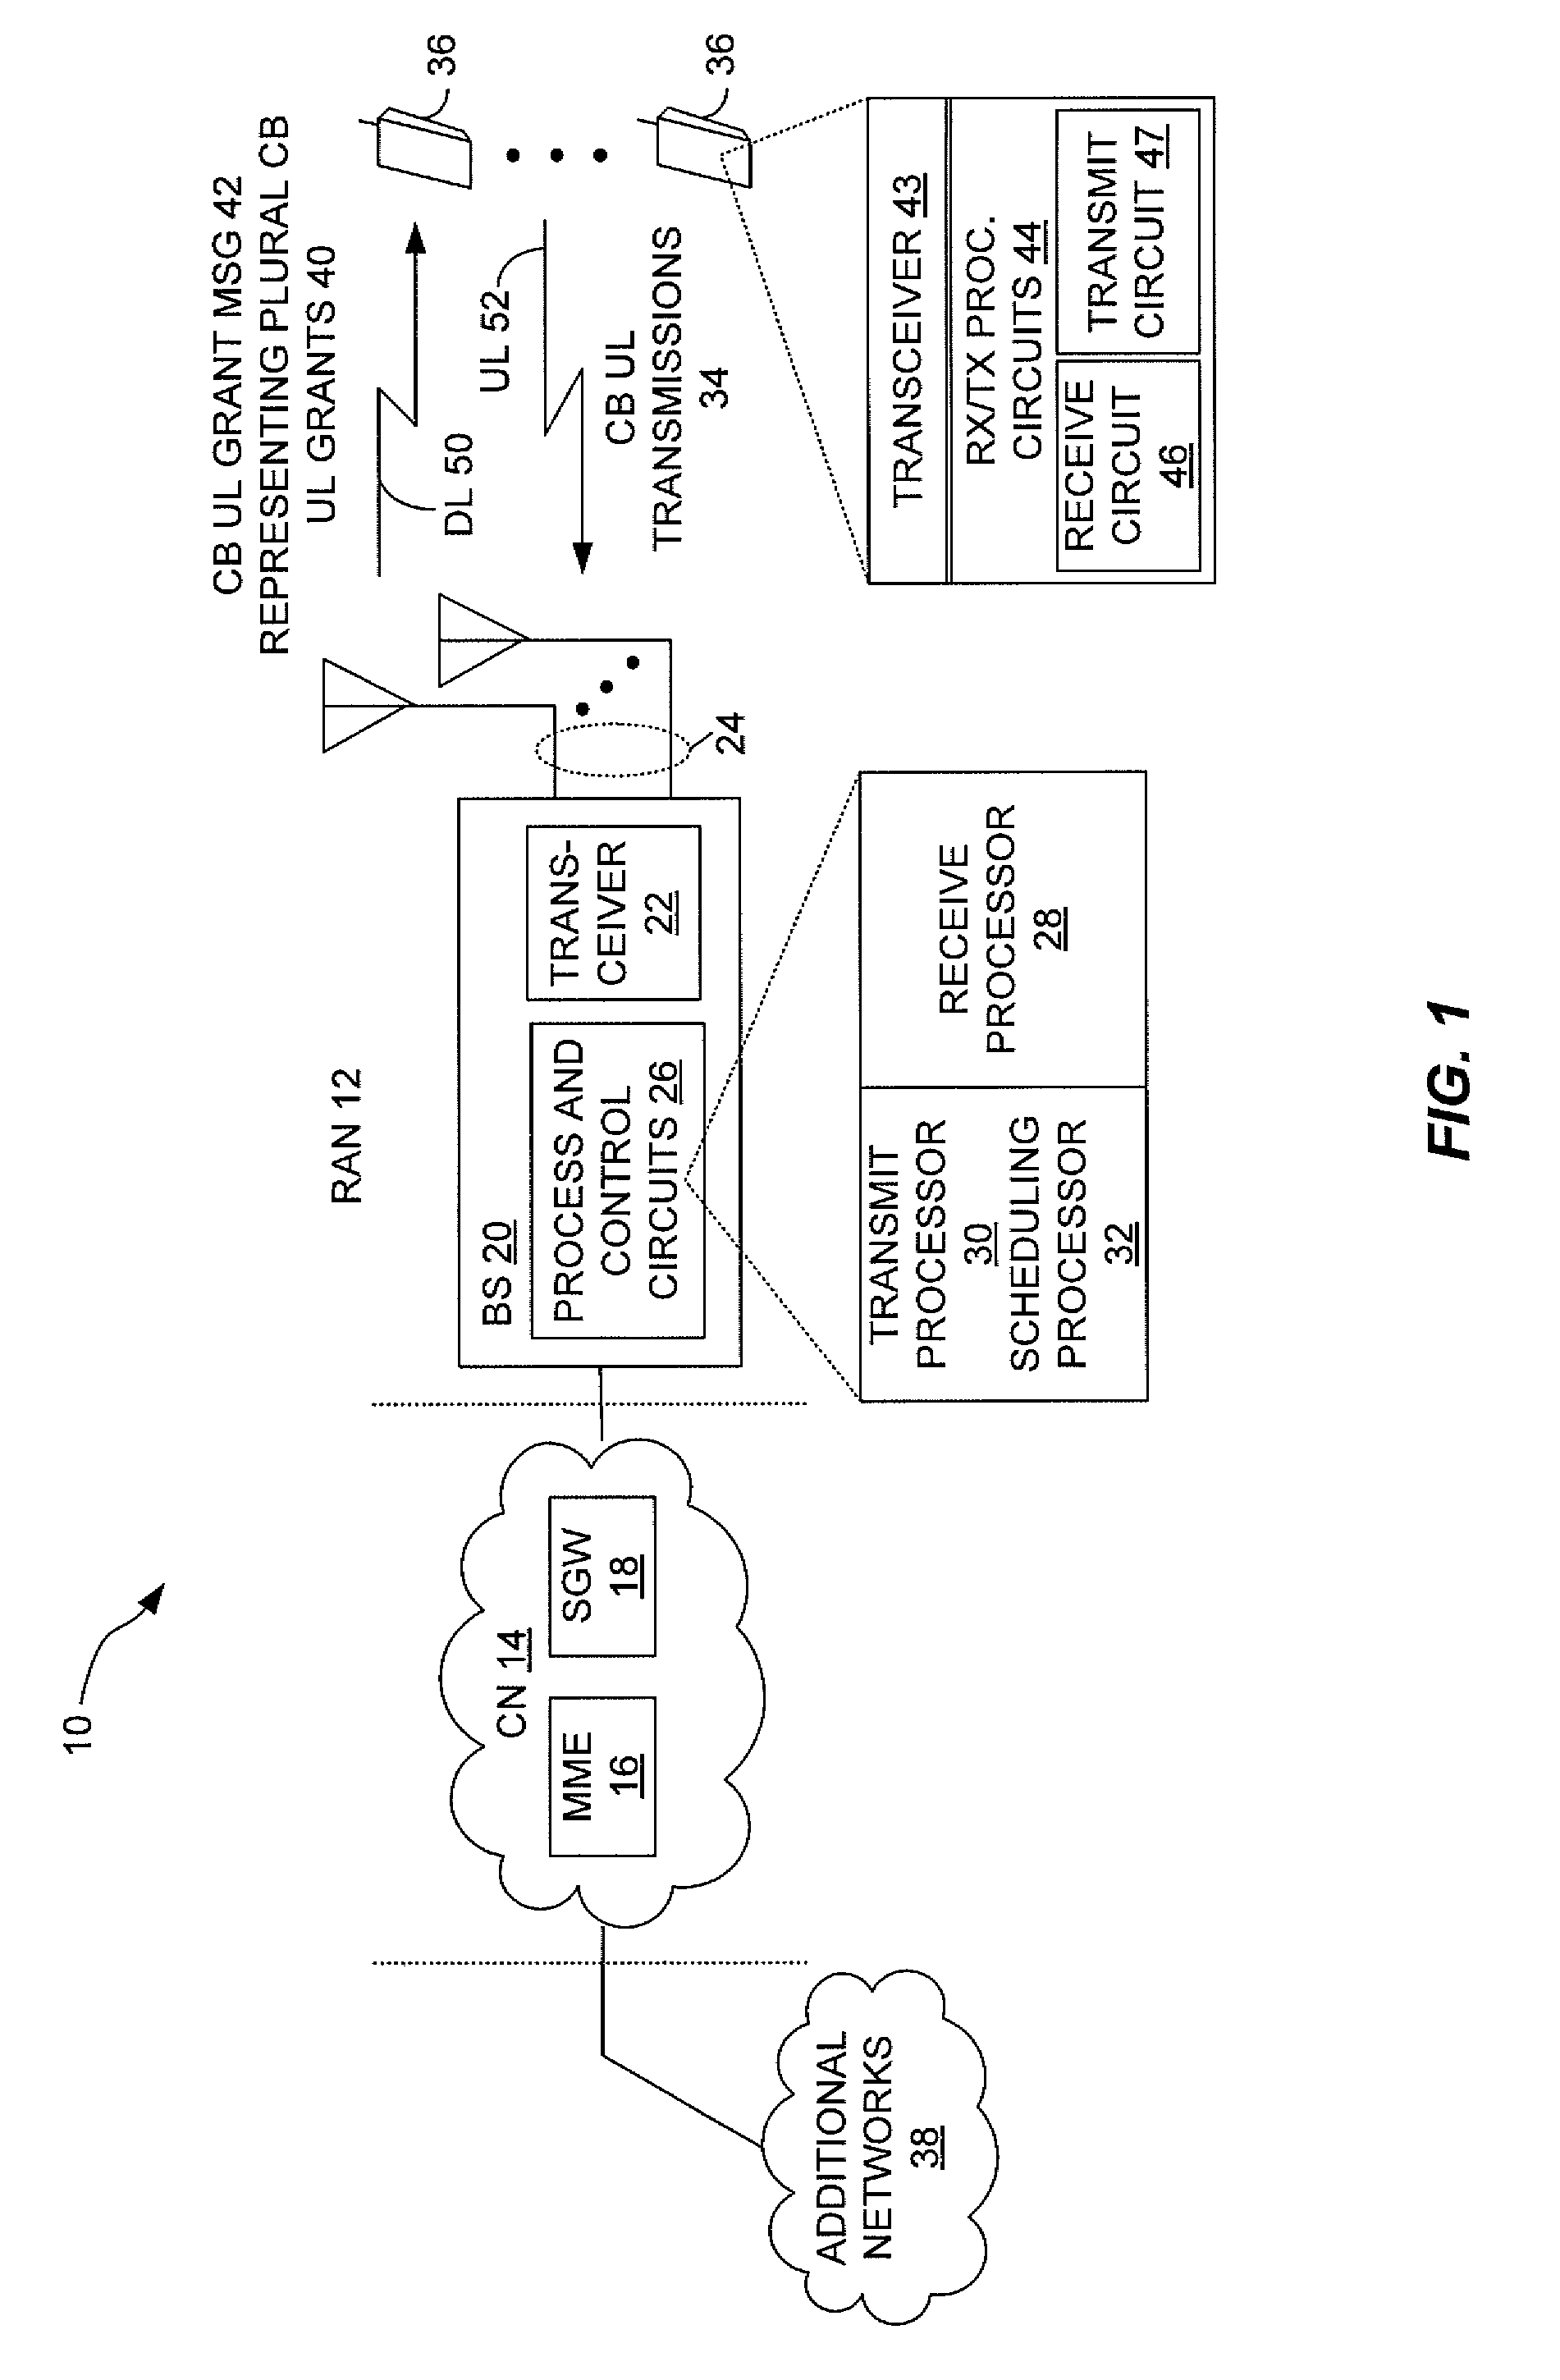 Method and Apparatus for Contention-Based Granting in a Wireless Communication Network